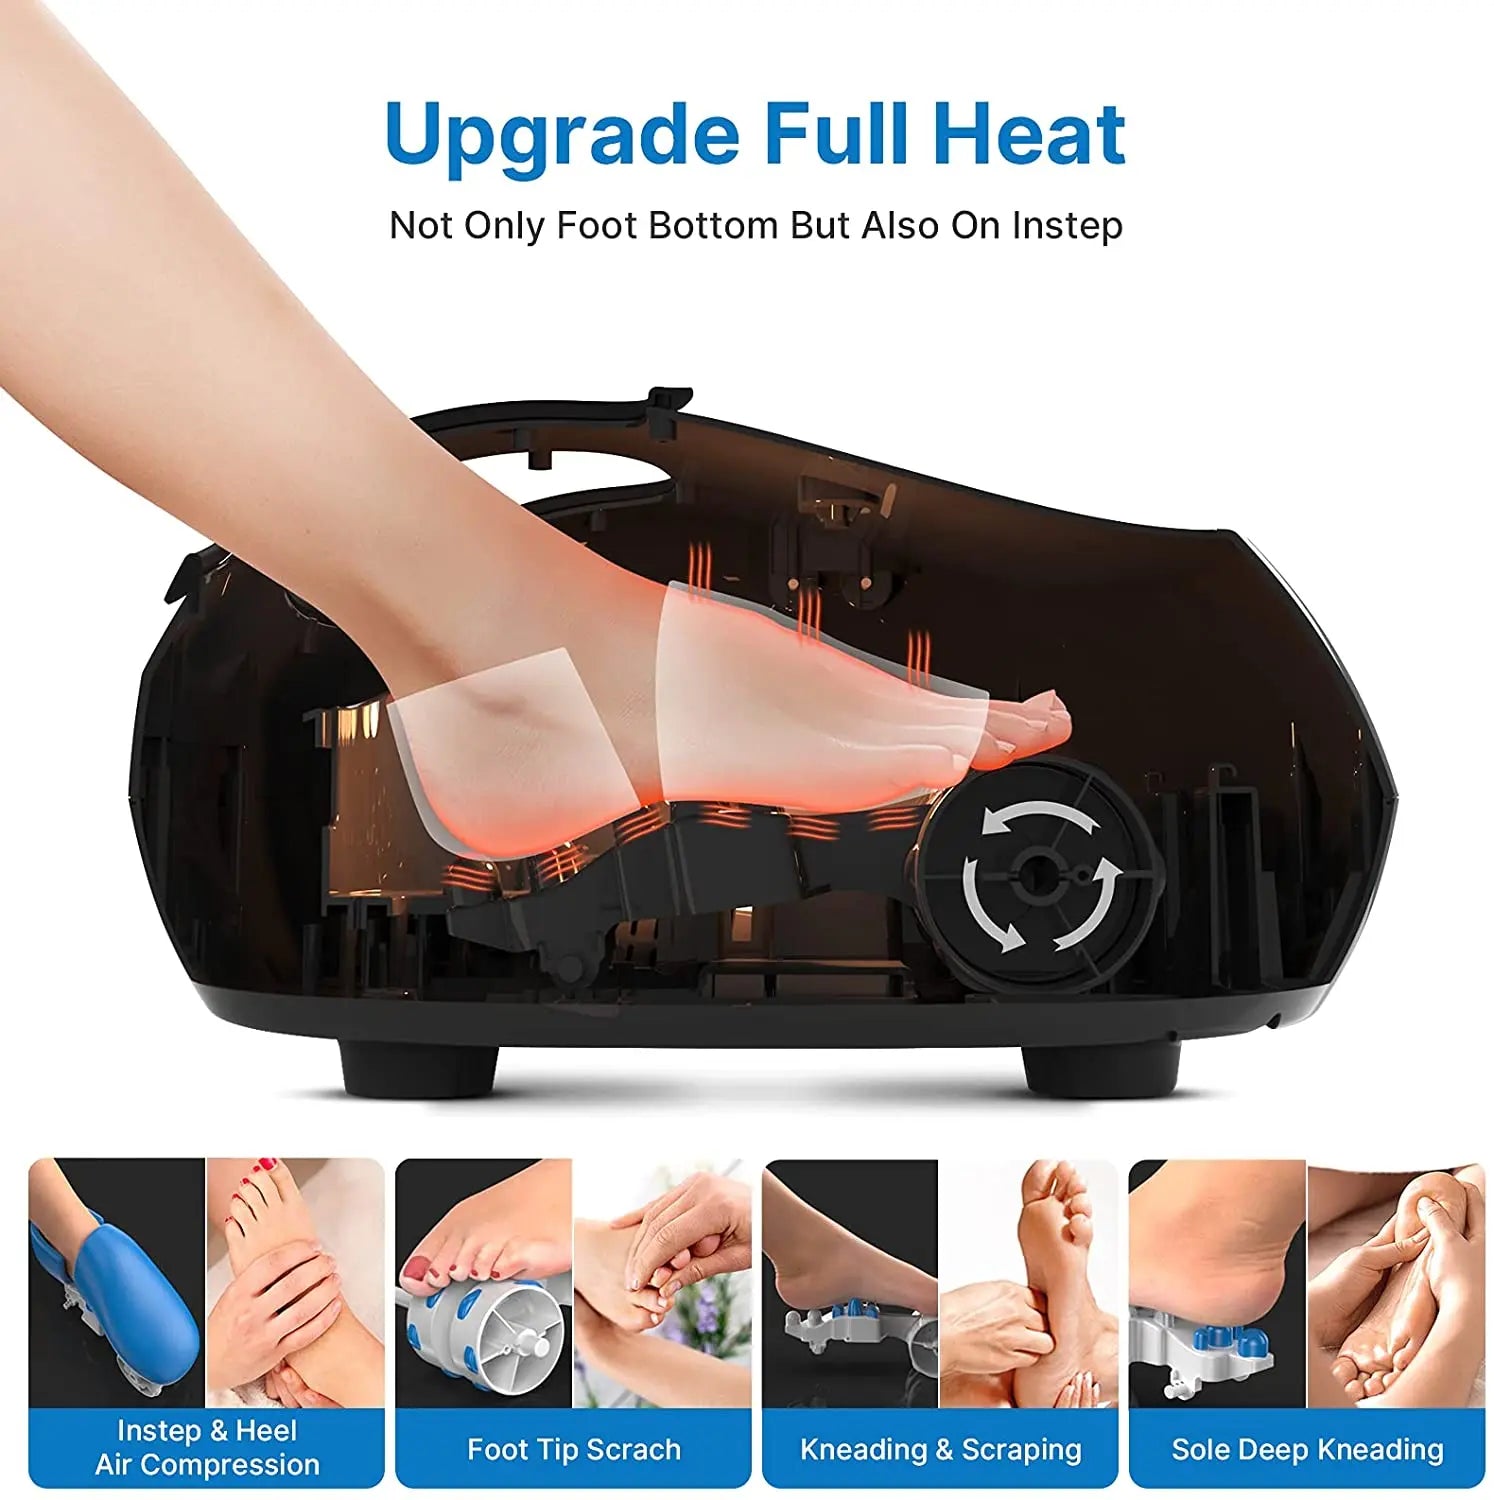 A Shiatsu Foot Massager with Handle with a transparent top reveals internal components. A person's foot is shown inside, demonstrating the device’s use. Text reads "Upgrade Full Heat" and "Not Only Foot Bottom But Also On Instep." Below are images showing features like "Shiatsu Kneading," "Instep & Heel Air Compression," and "Sole Deep Kneading.